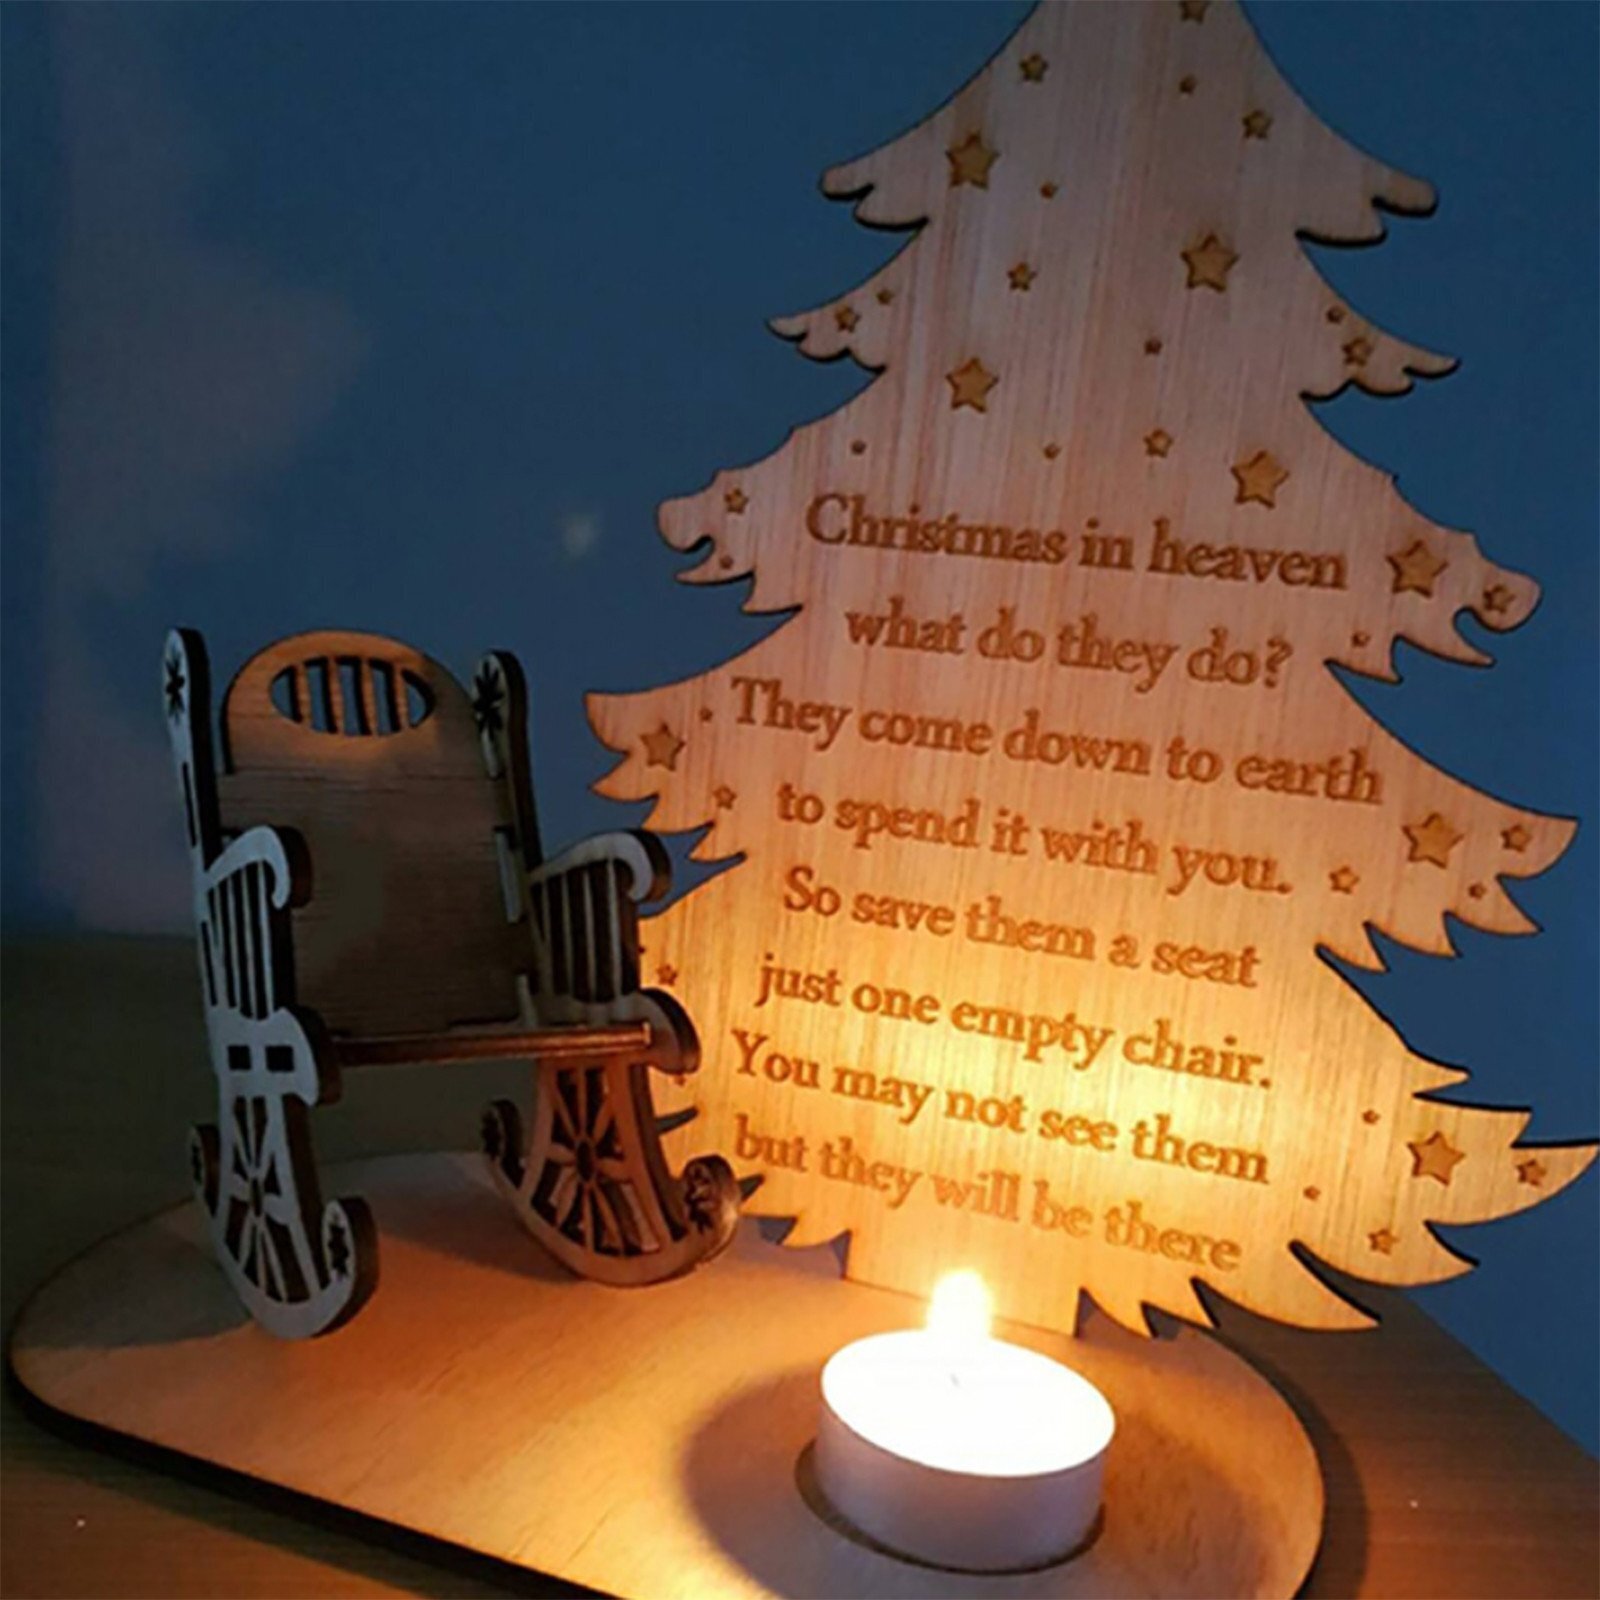 🔥HOT SALE - 49% OFF🔥Christmas Candle Memorial Display to Remember Loved Ones